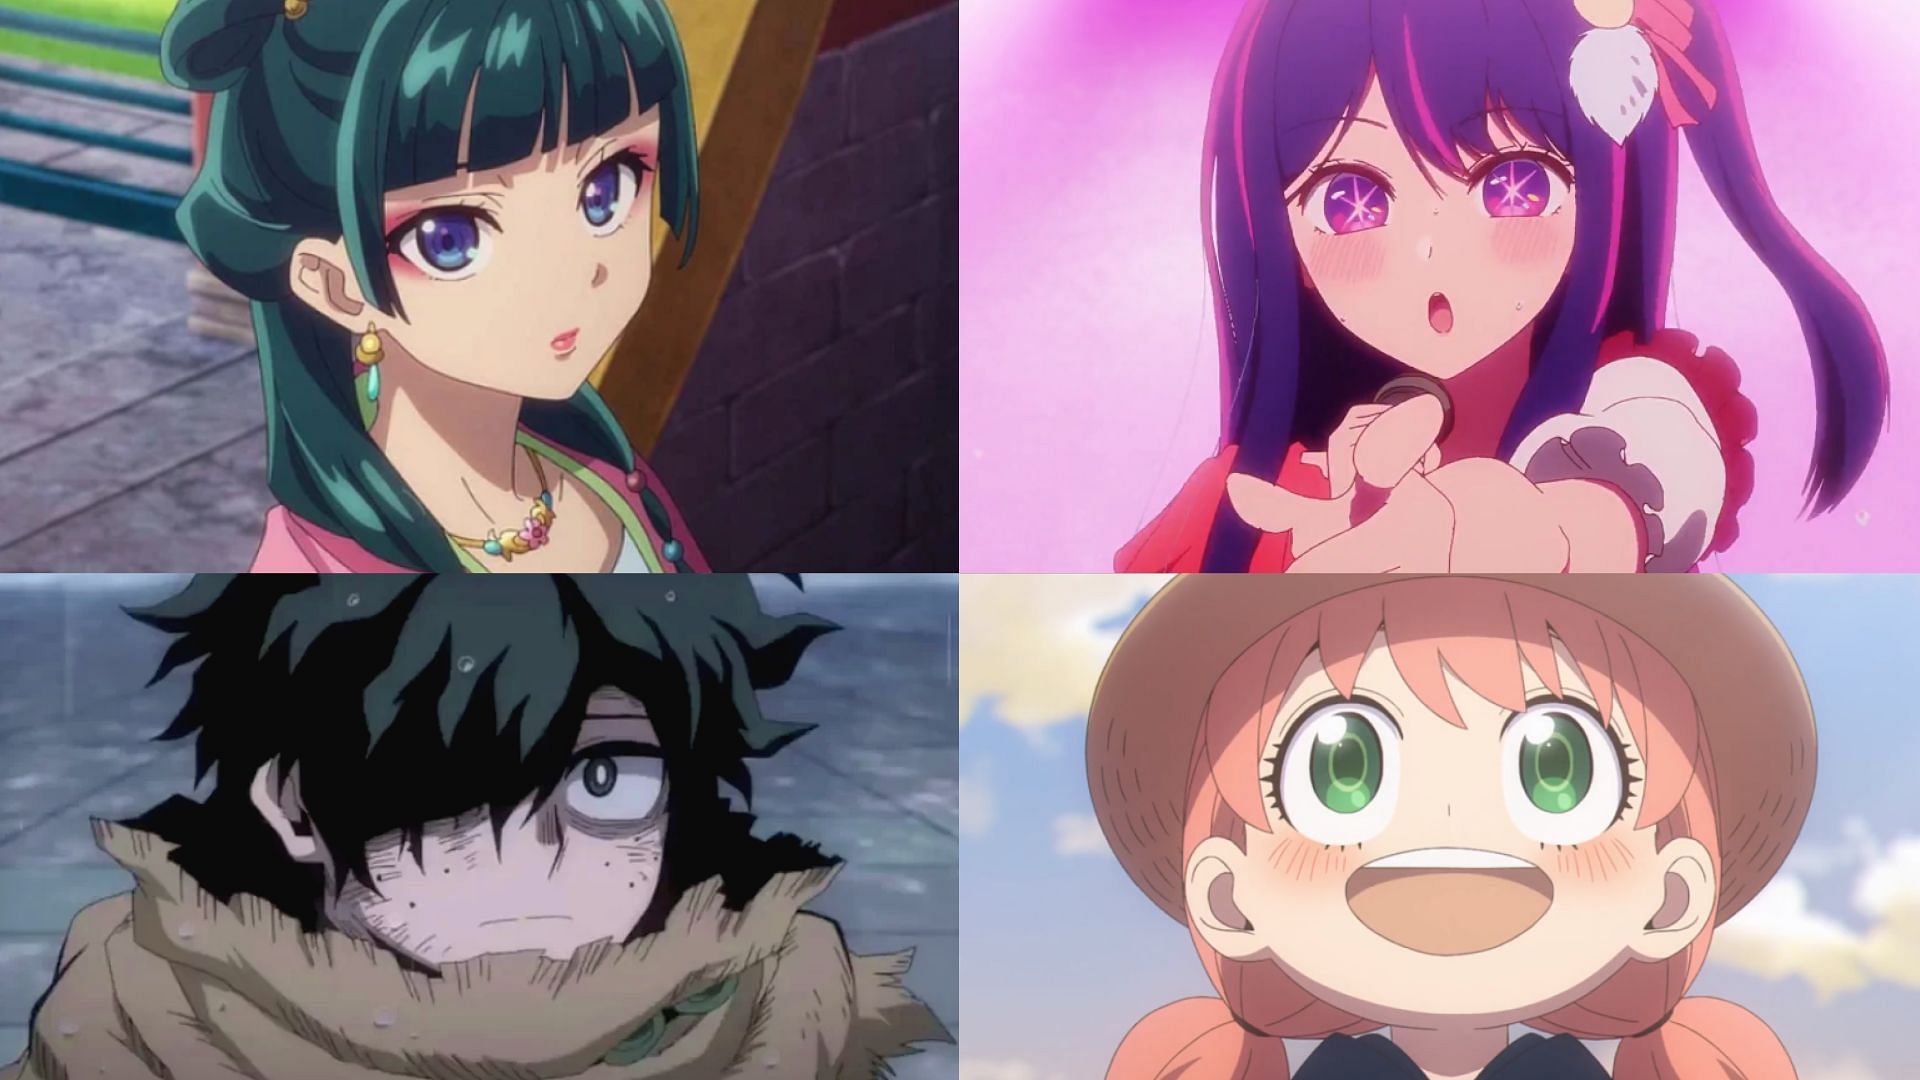 Anime Profile Pictures: Popularity, Appeal, and Controversies. - Blog  Nigeriana